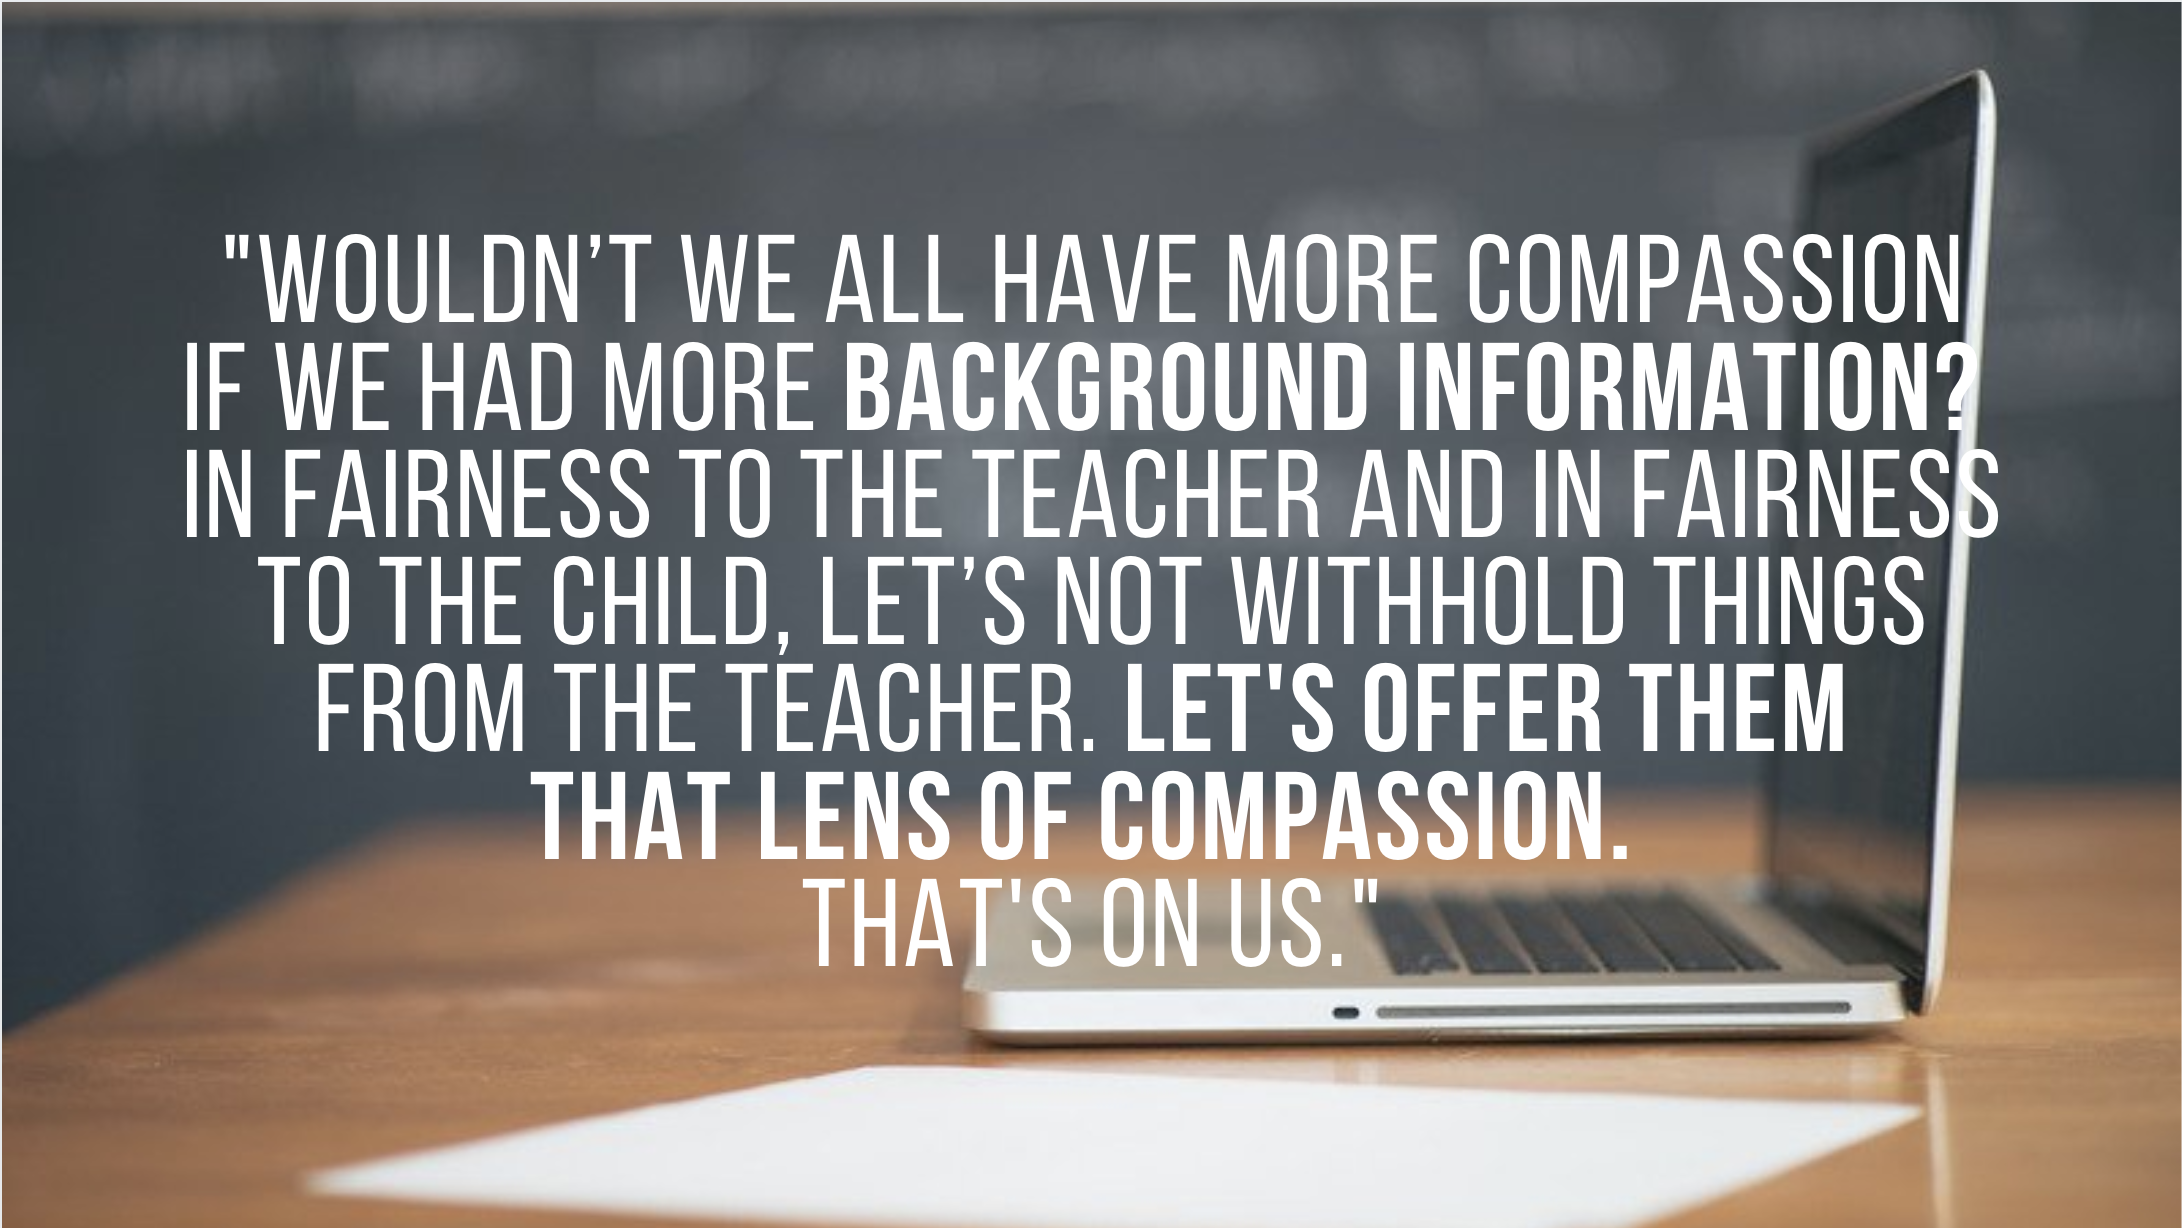 image of a laptop with the text quote: ""Wouldn't we all have more compassion if we had more background information? In fairness to the teacher and in fairness to the child, let's not withhold things from the teacher. Let's offer them that lens of compassion. That's on us."